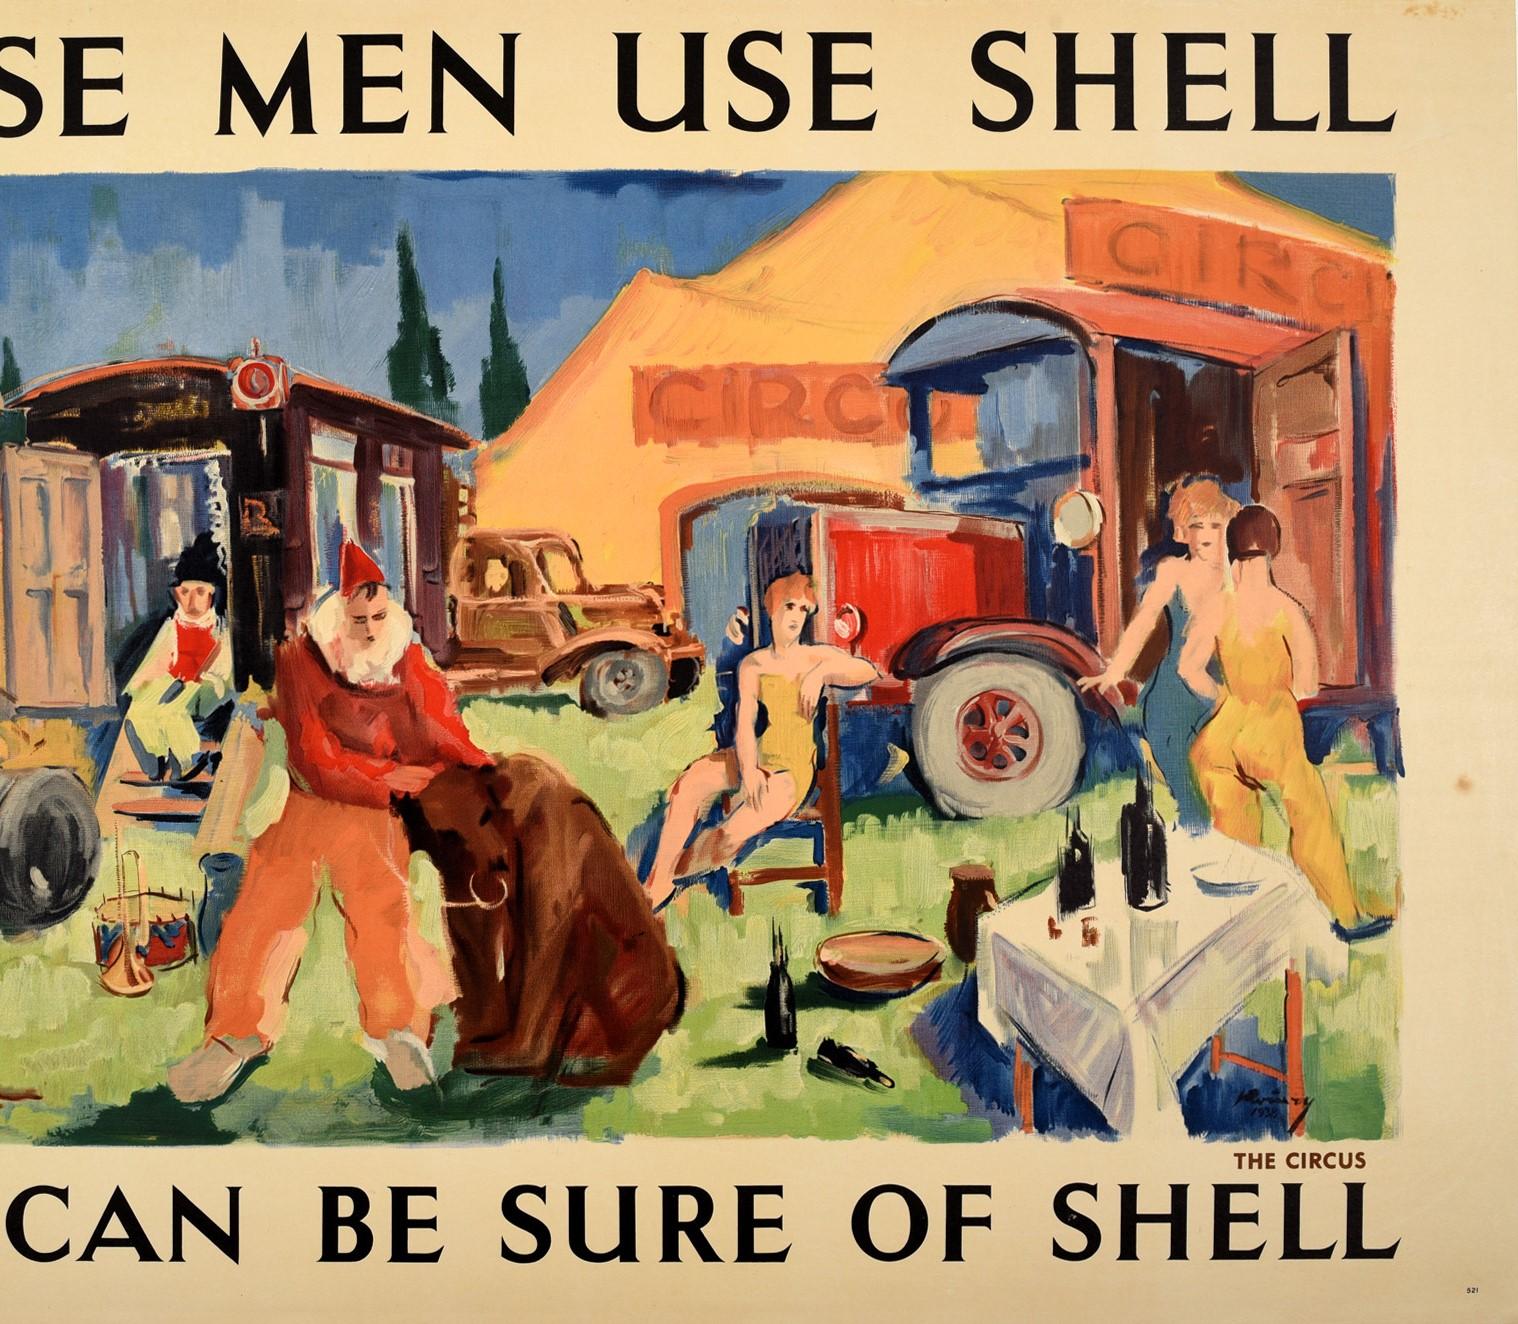 Original Vintage Poster The Circus These Men Use Shell You Can Be Sure Of Shell - Beige Print by Kavari Schwitzer